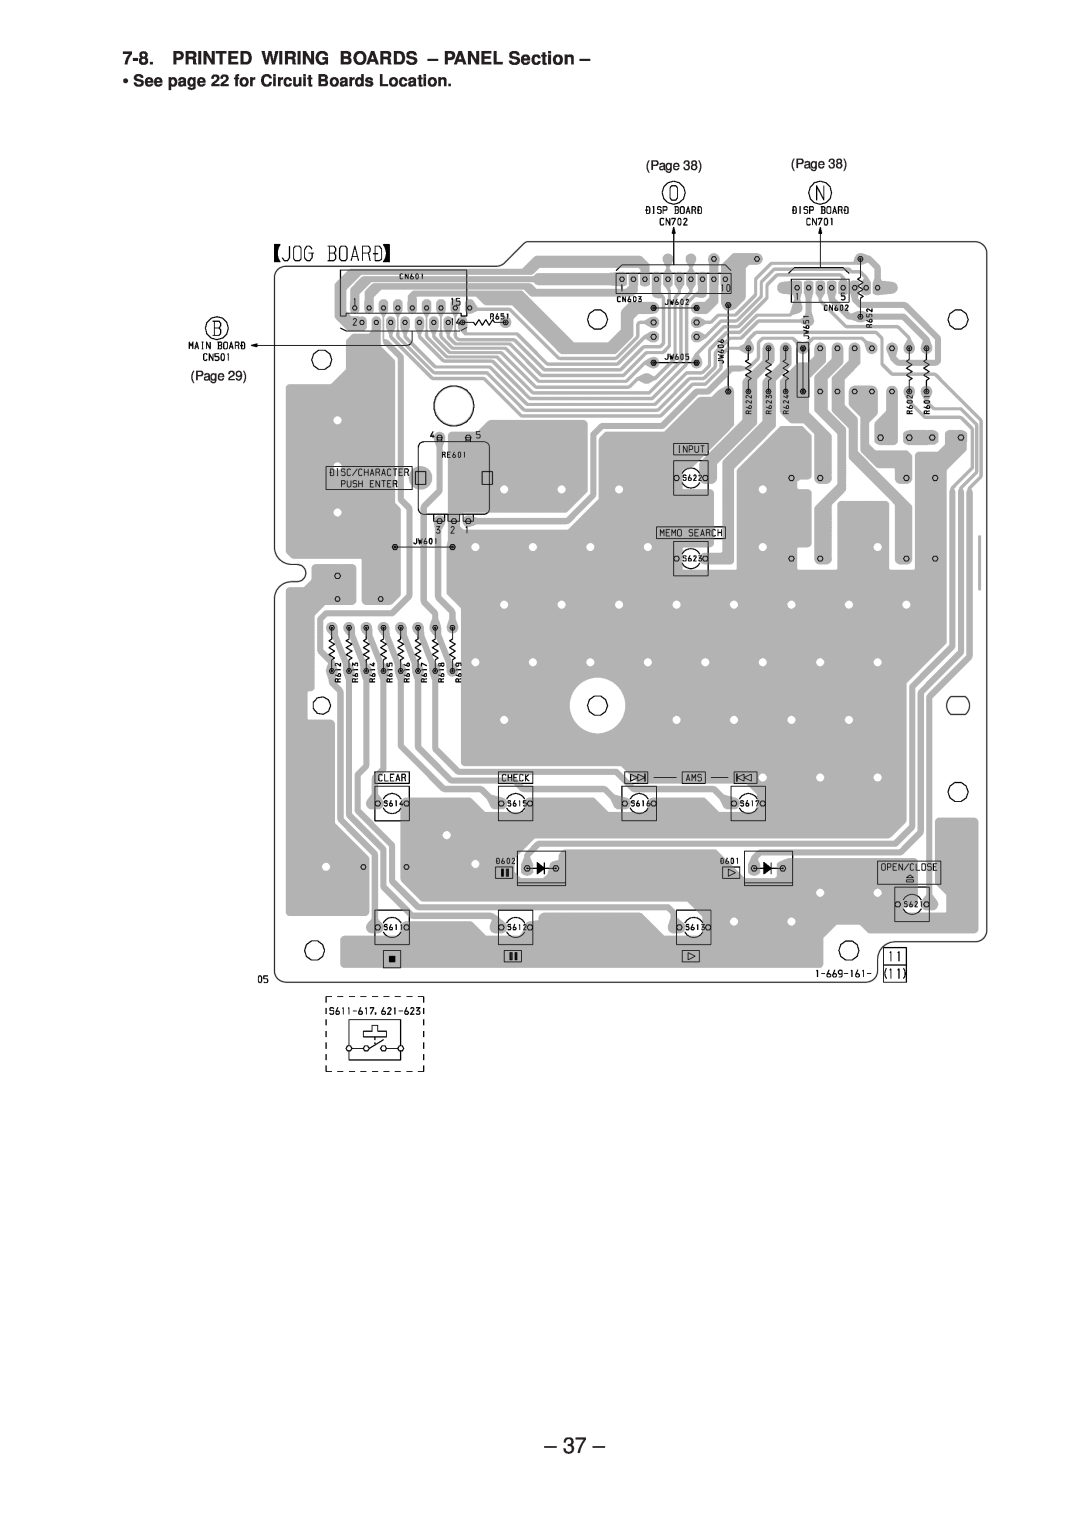 Sony Ericsson CDP-CX220 service manual PRINTED WIRING BOARDS - PANEL Section, See page 22 for Circuit Boards Location 